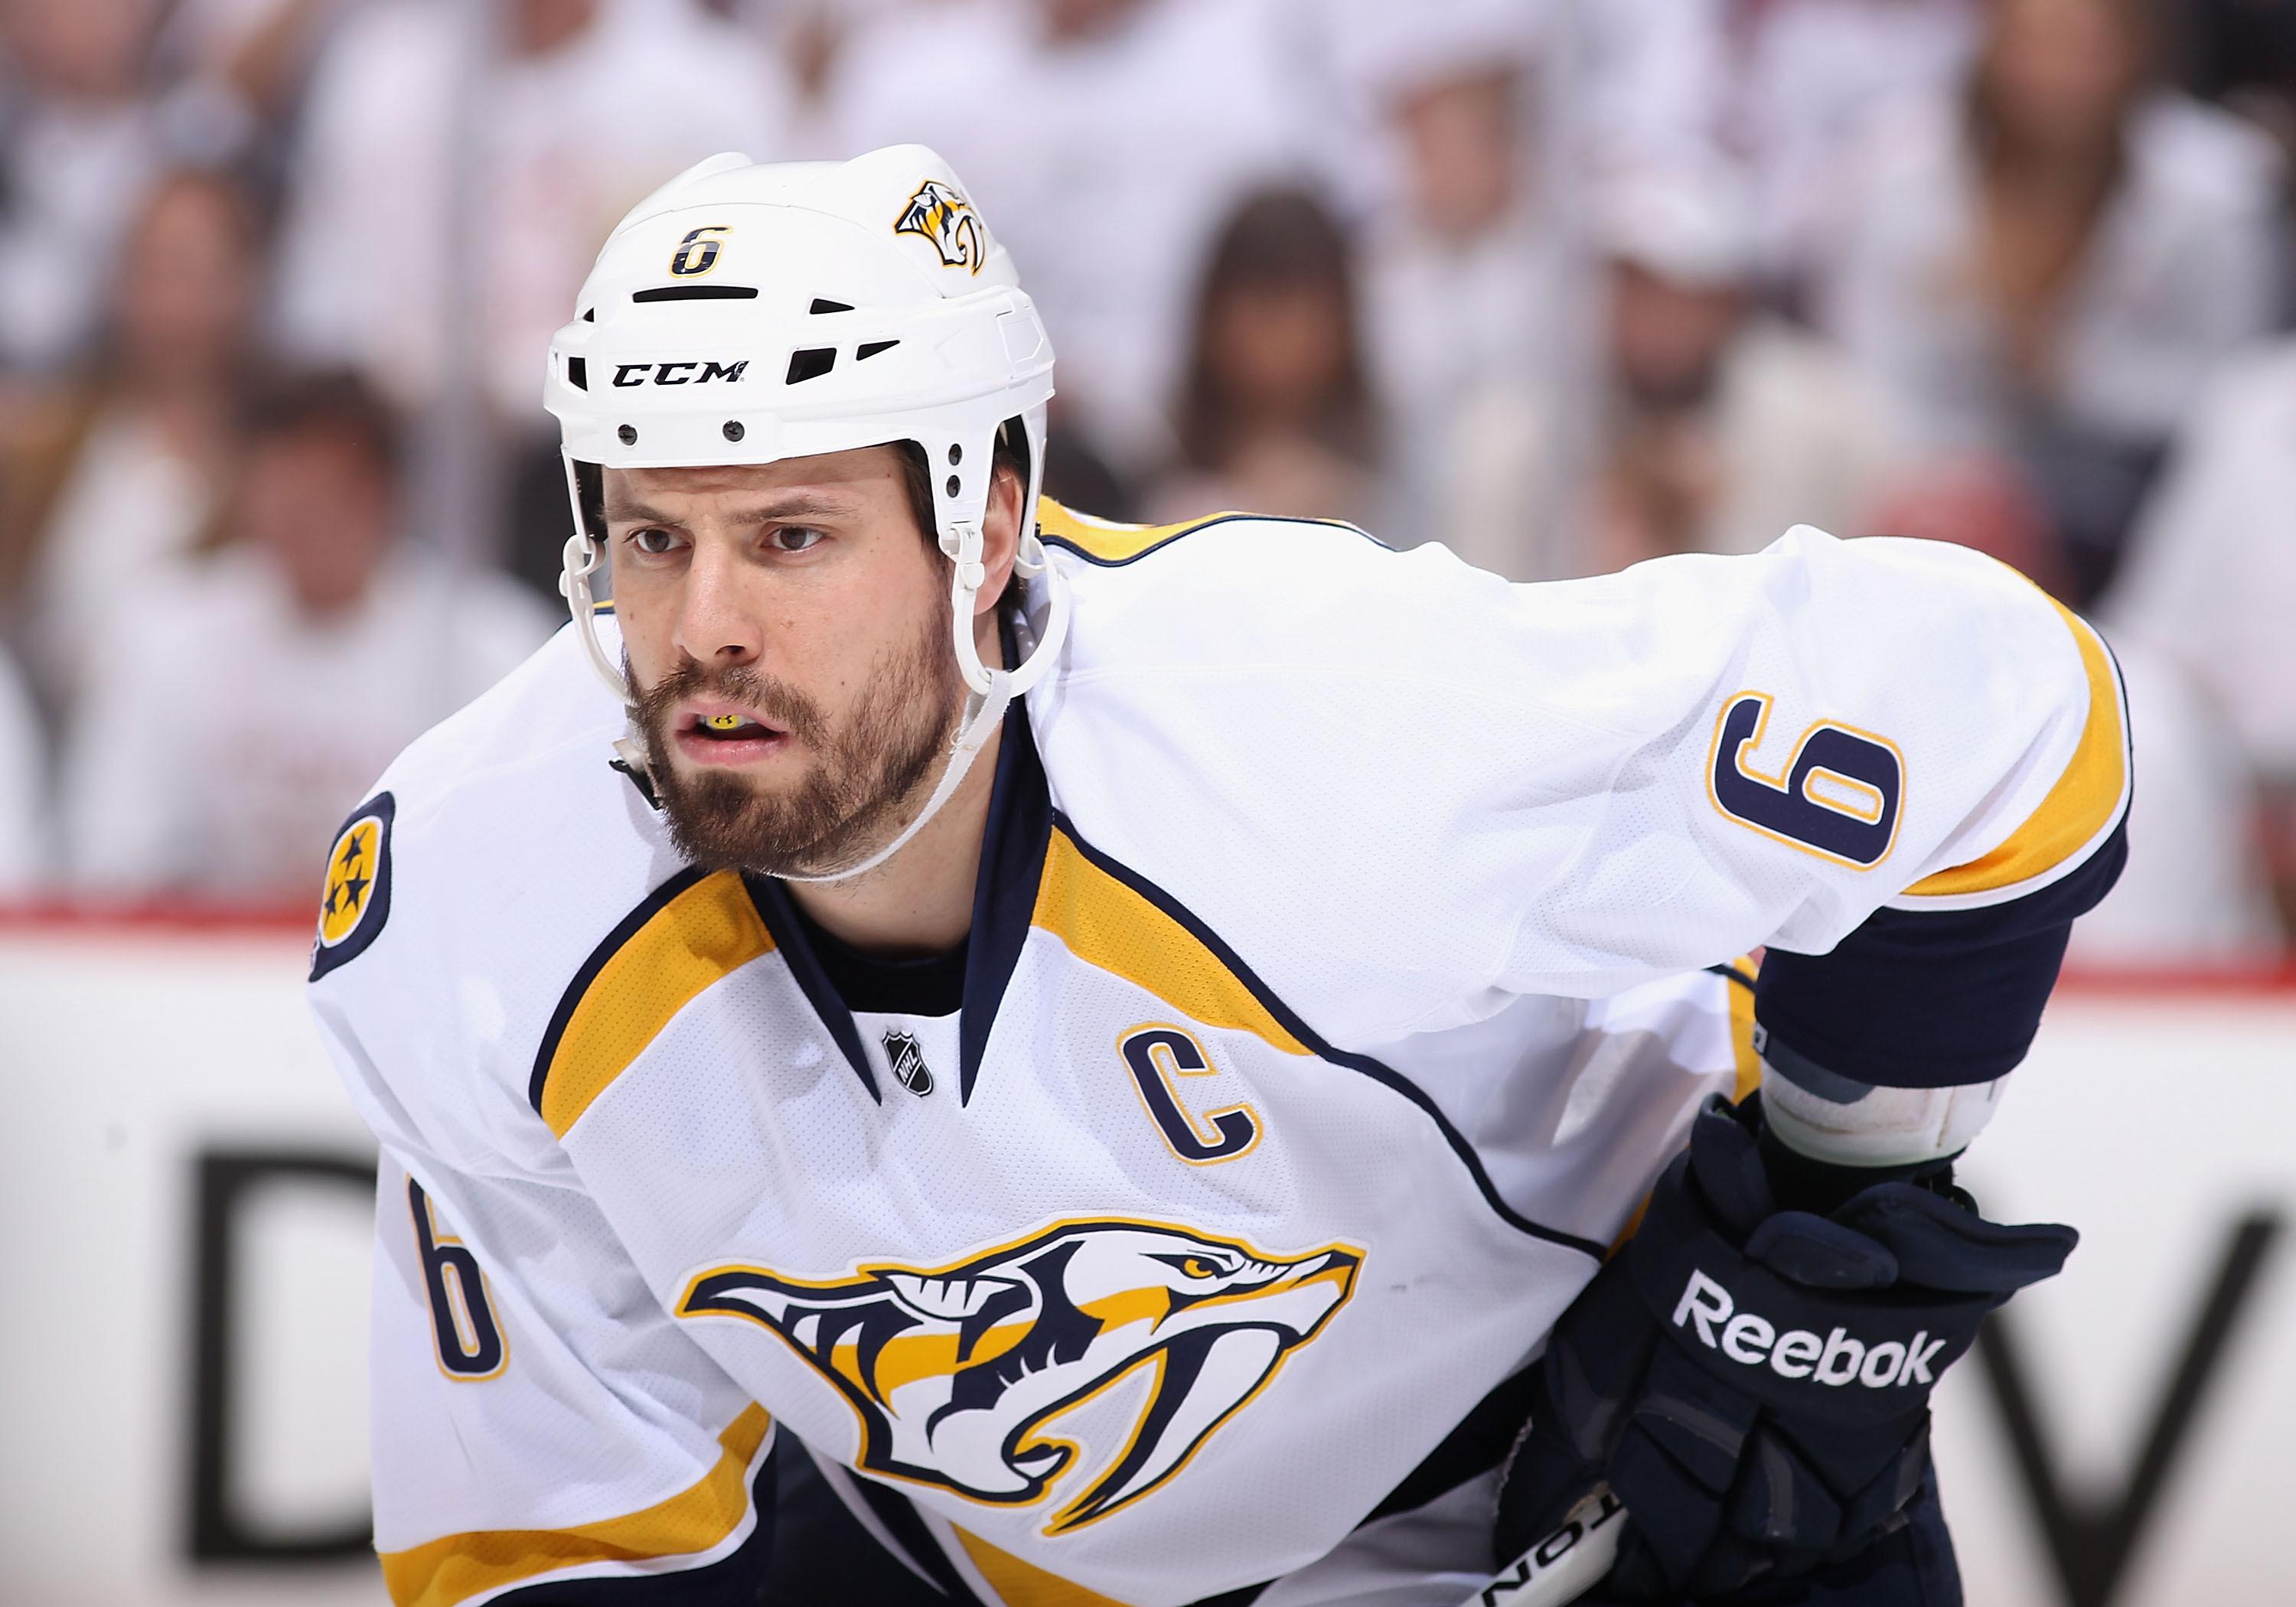 SHEA Weber on ice wallpaper and image, picture, photo